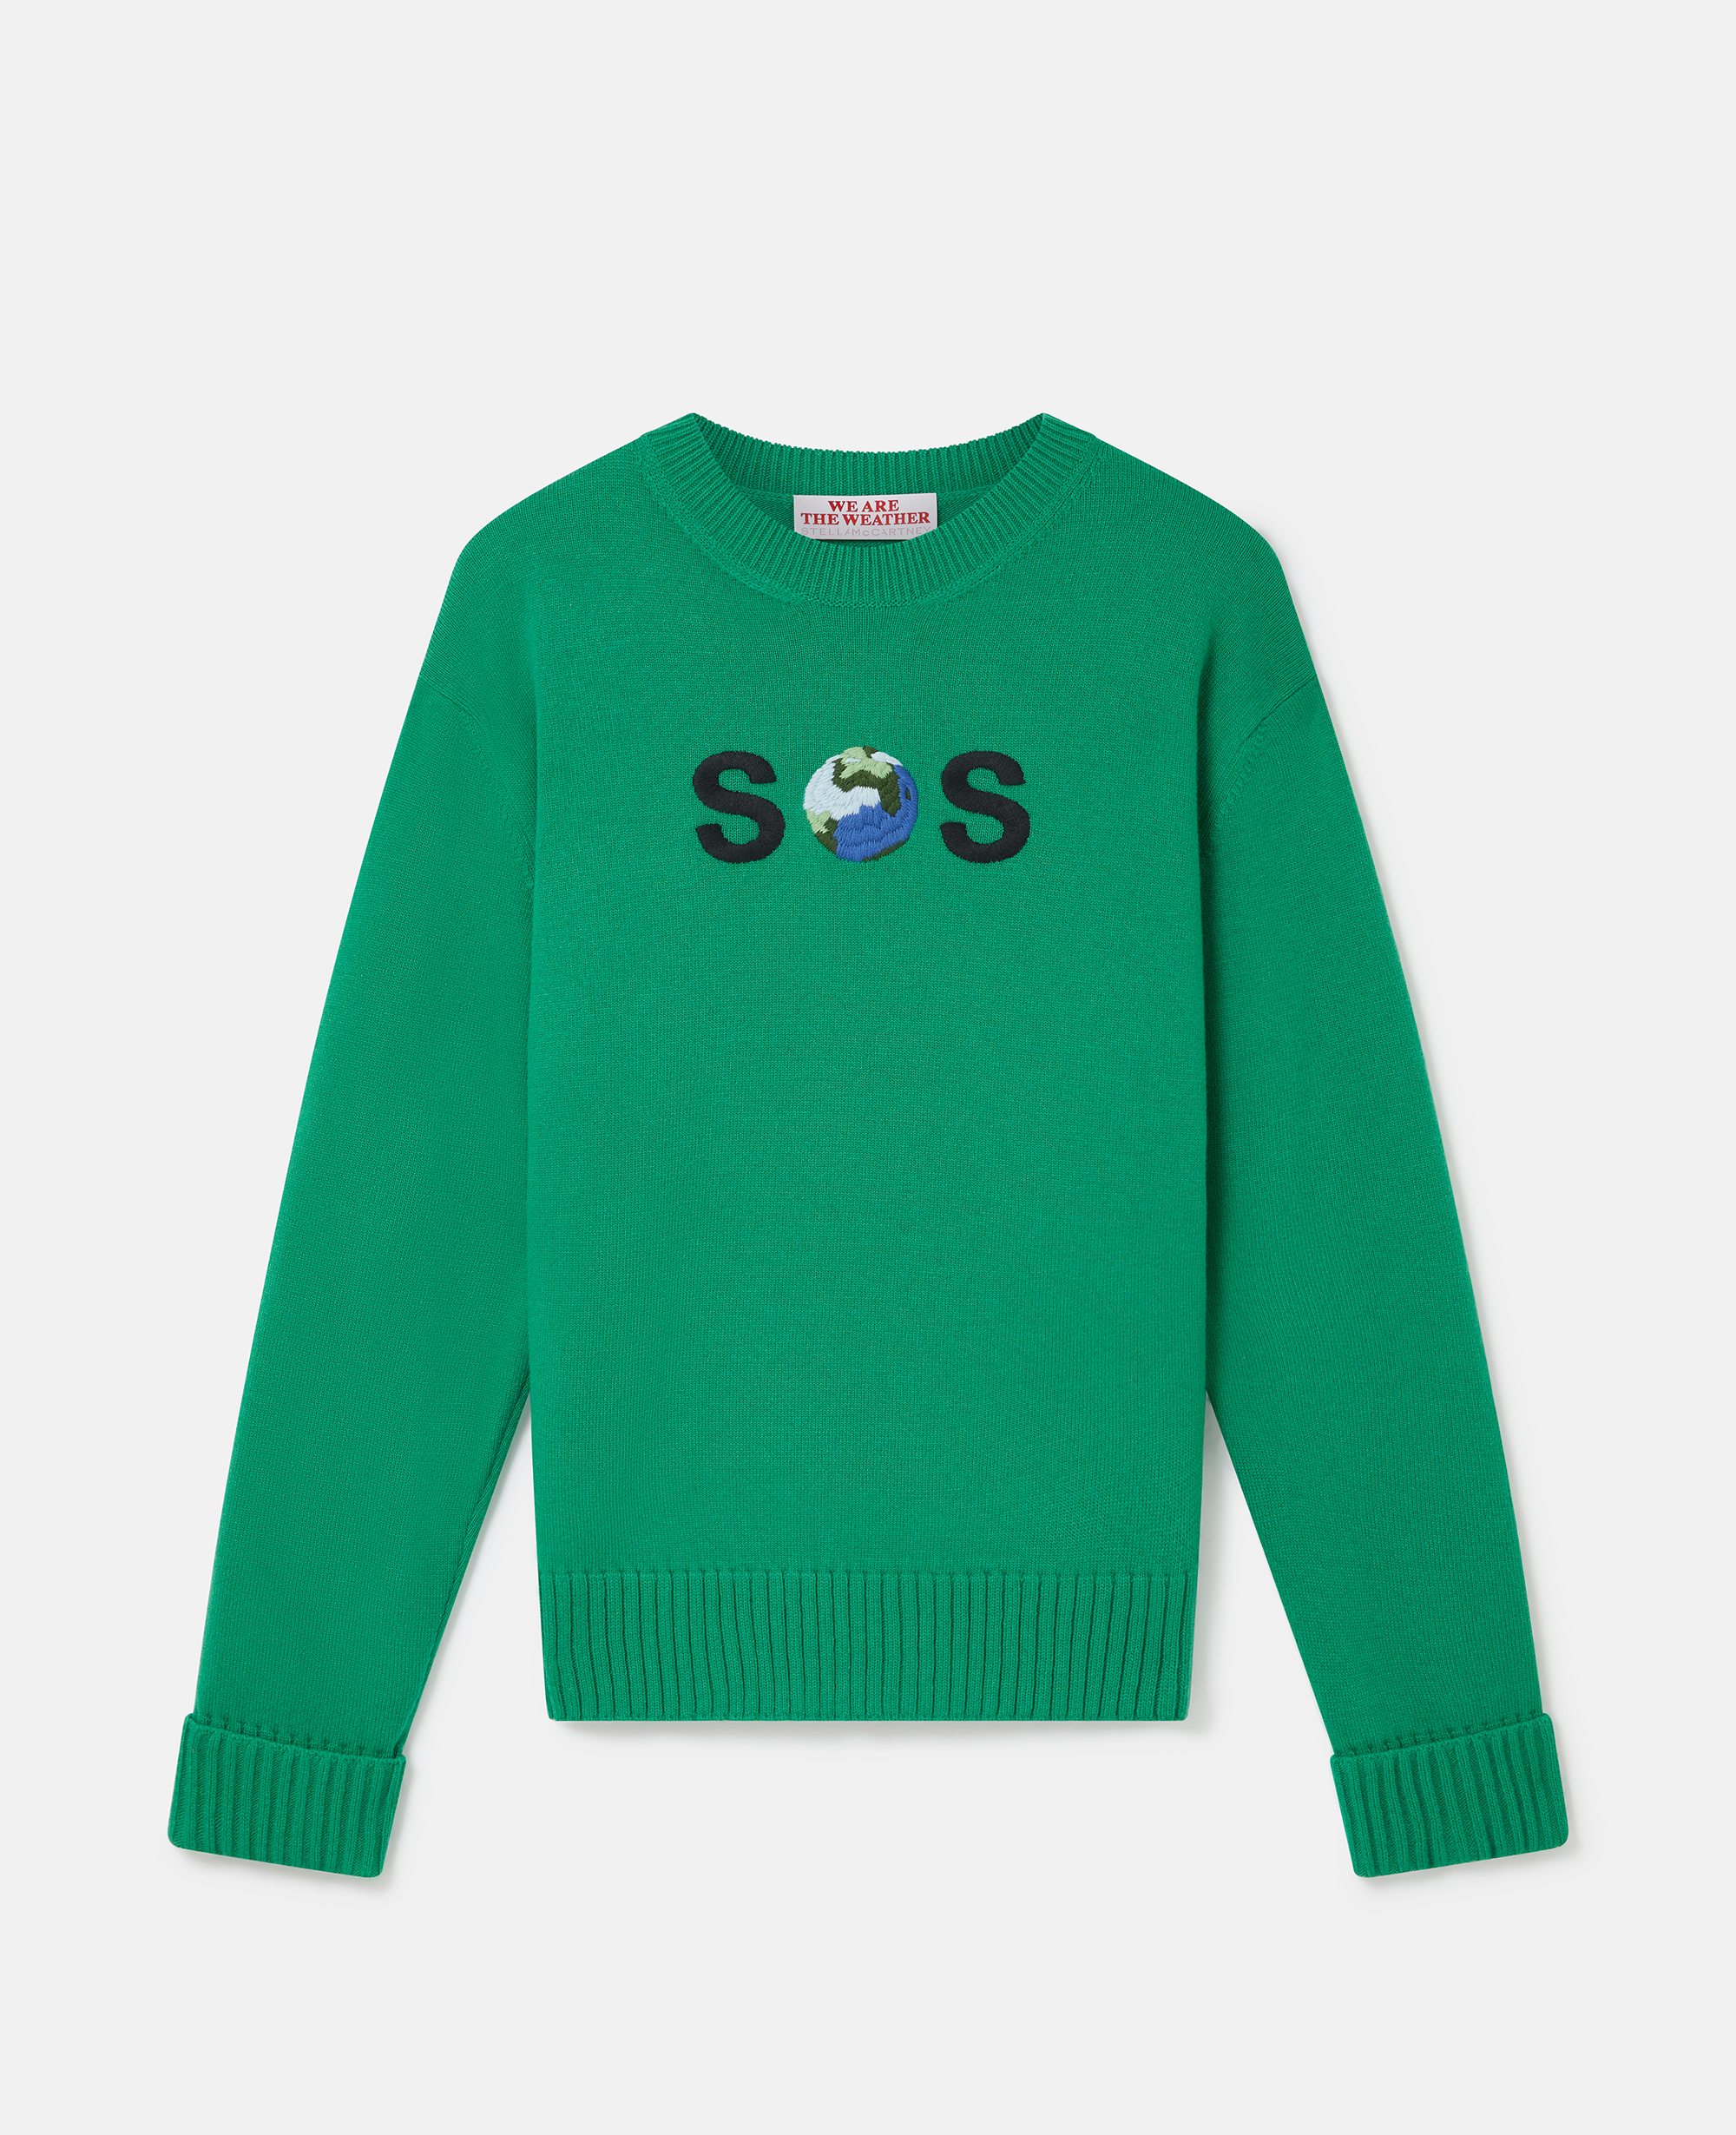 Stella Mccartney Sos Embroidered Knit Jumper In Green